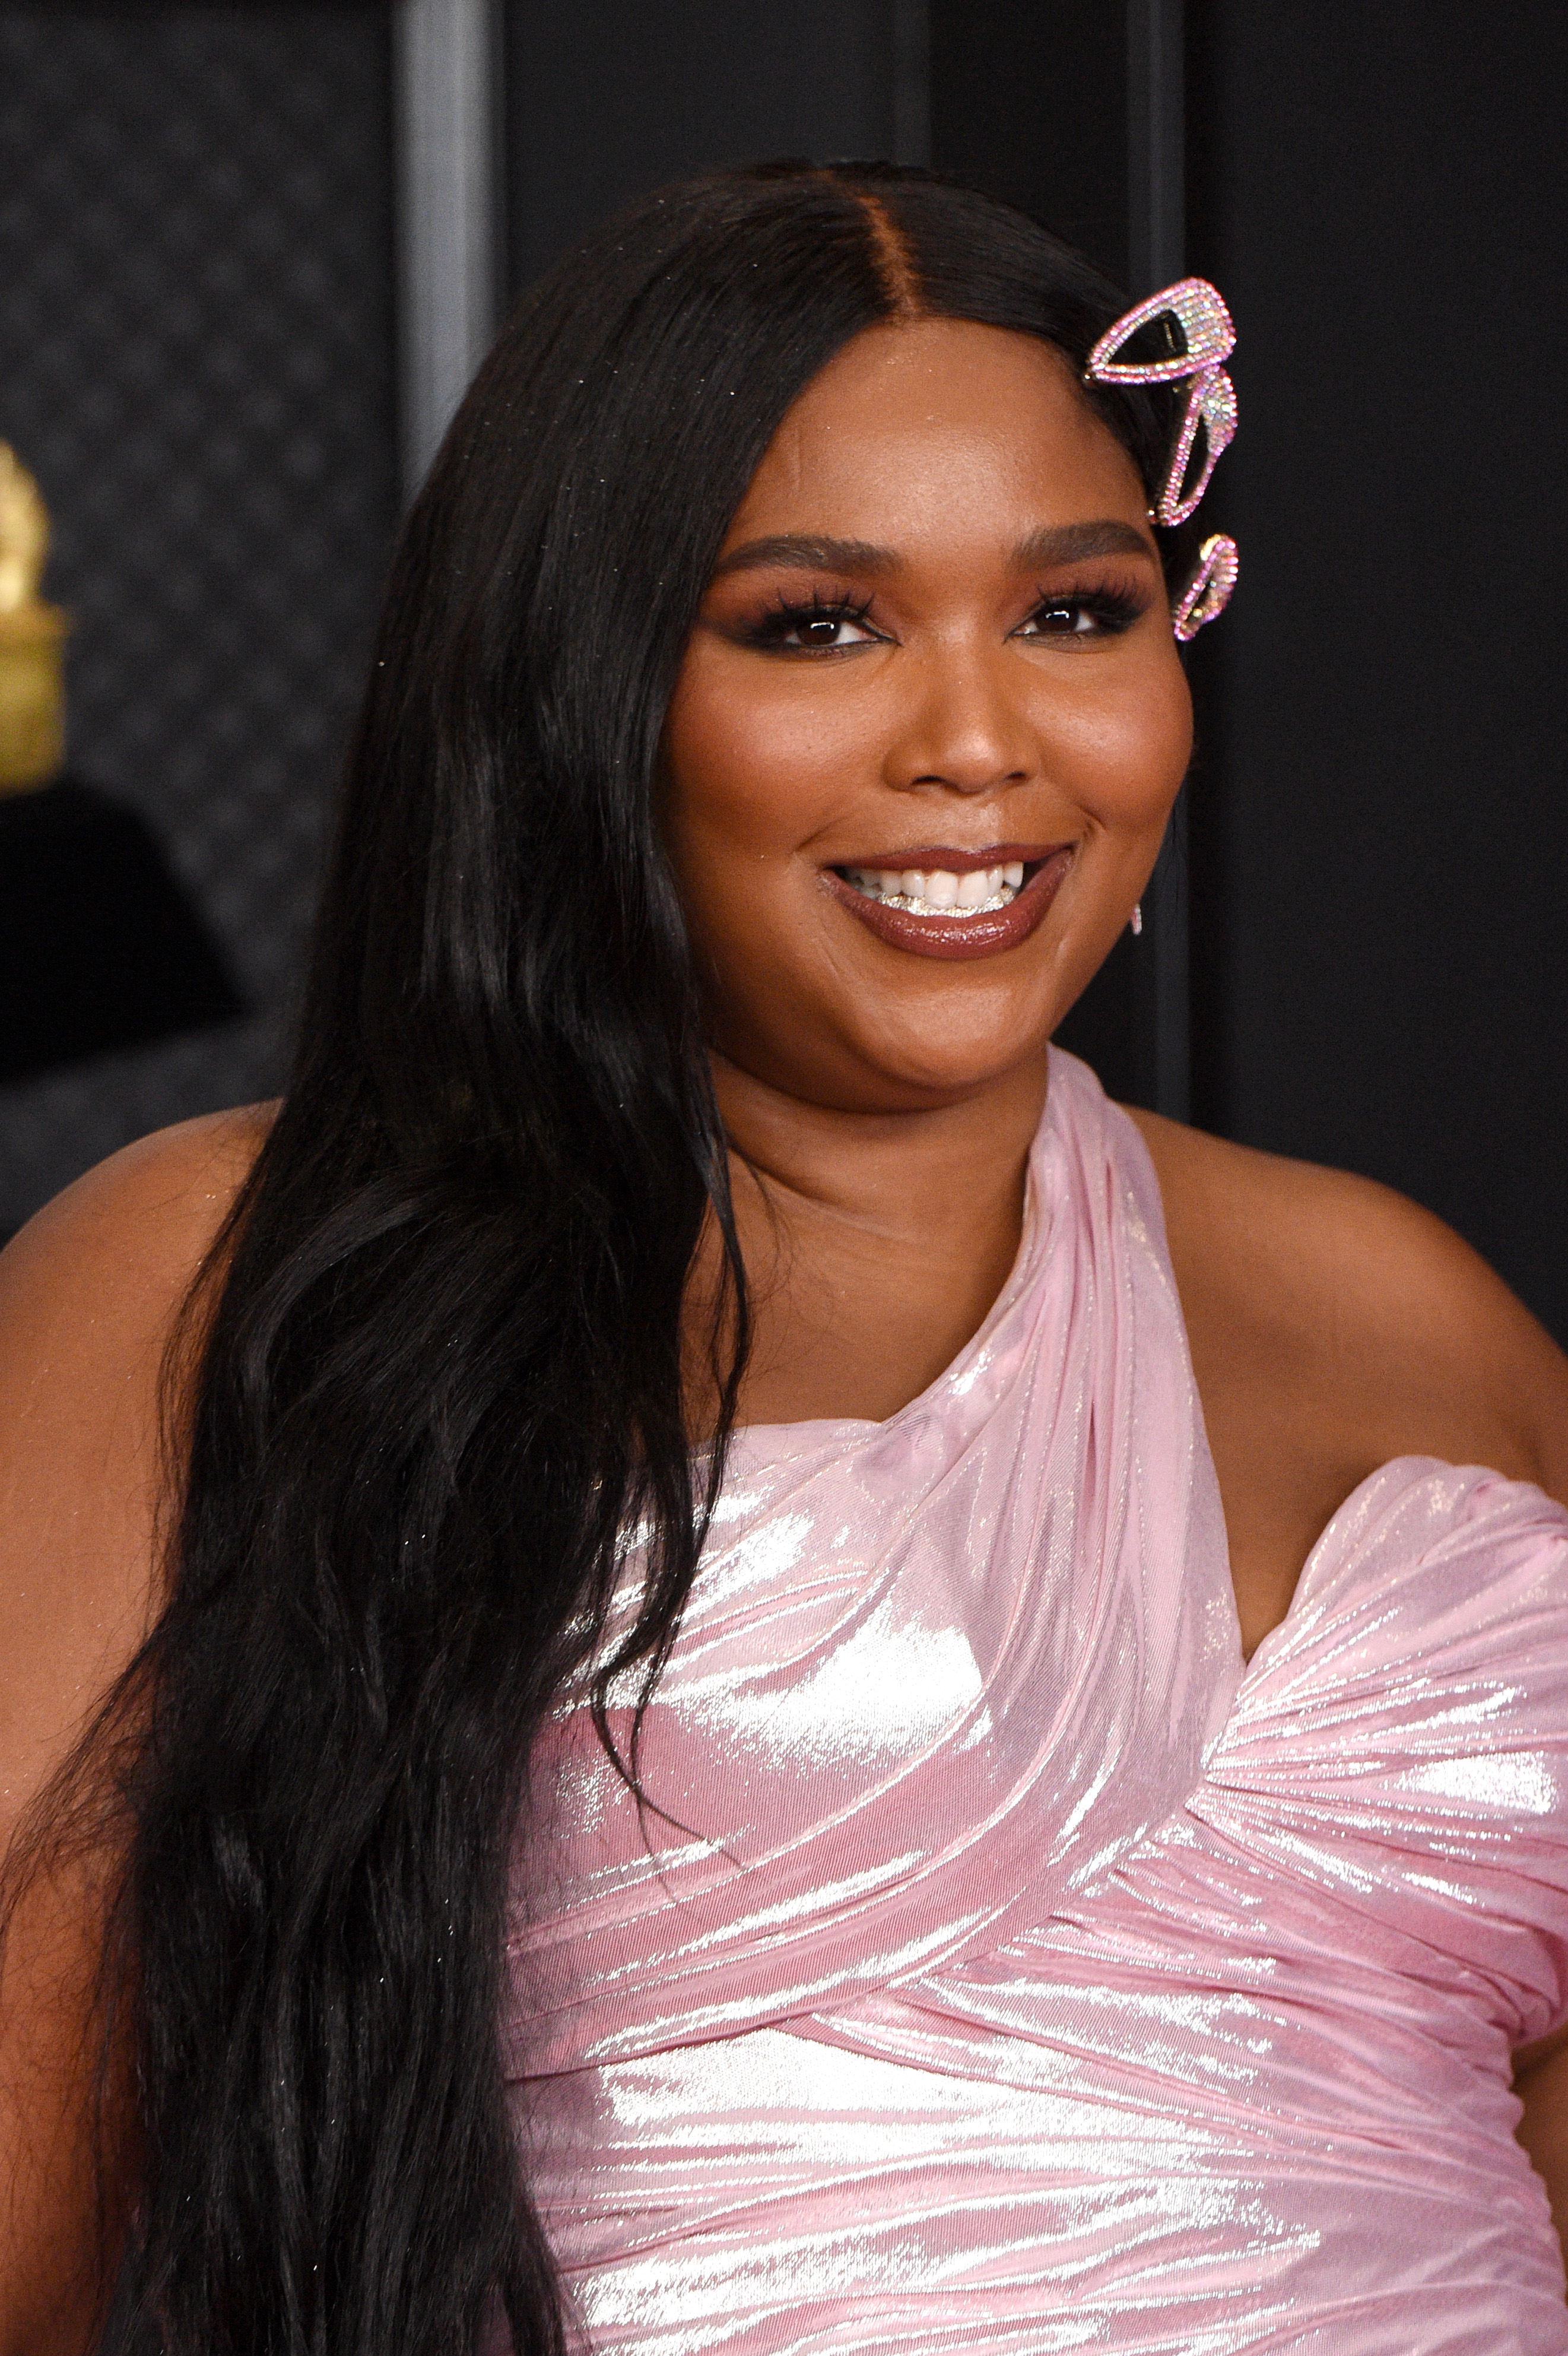 Lizzo Shares A Heartfelt Message About The Importance Of Self-Care  Practices - Grazia